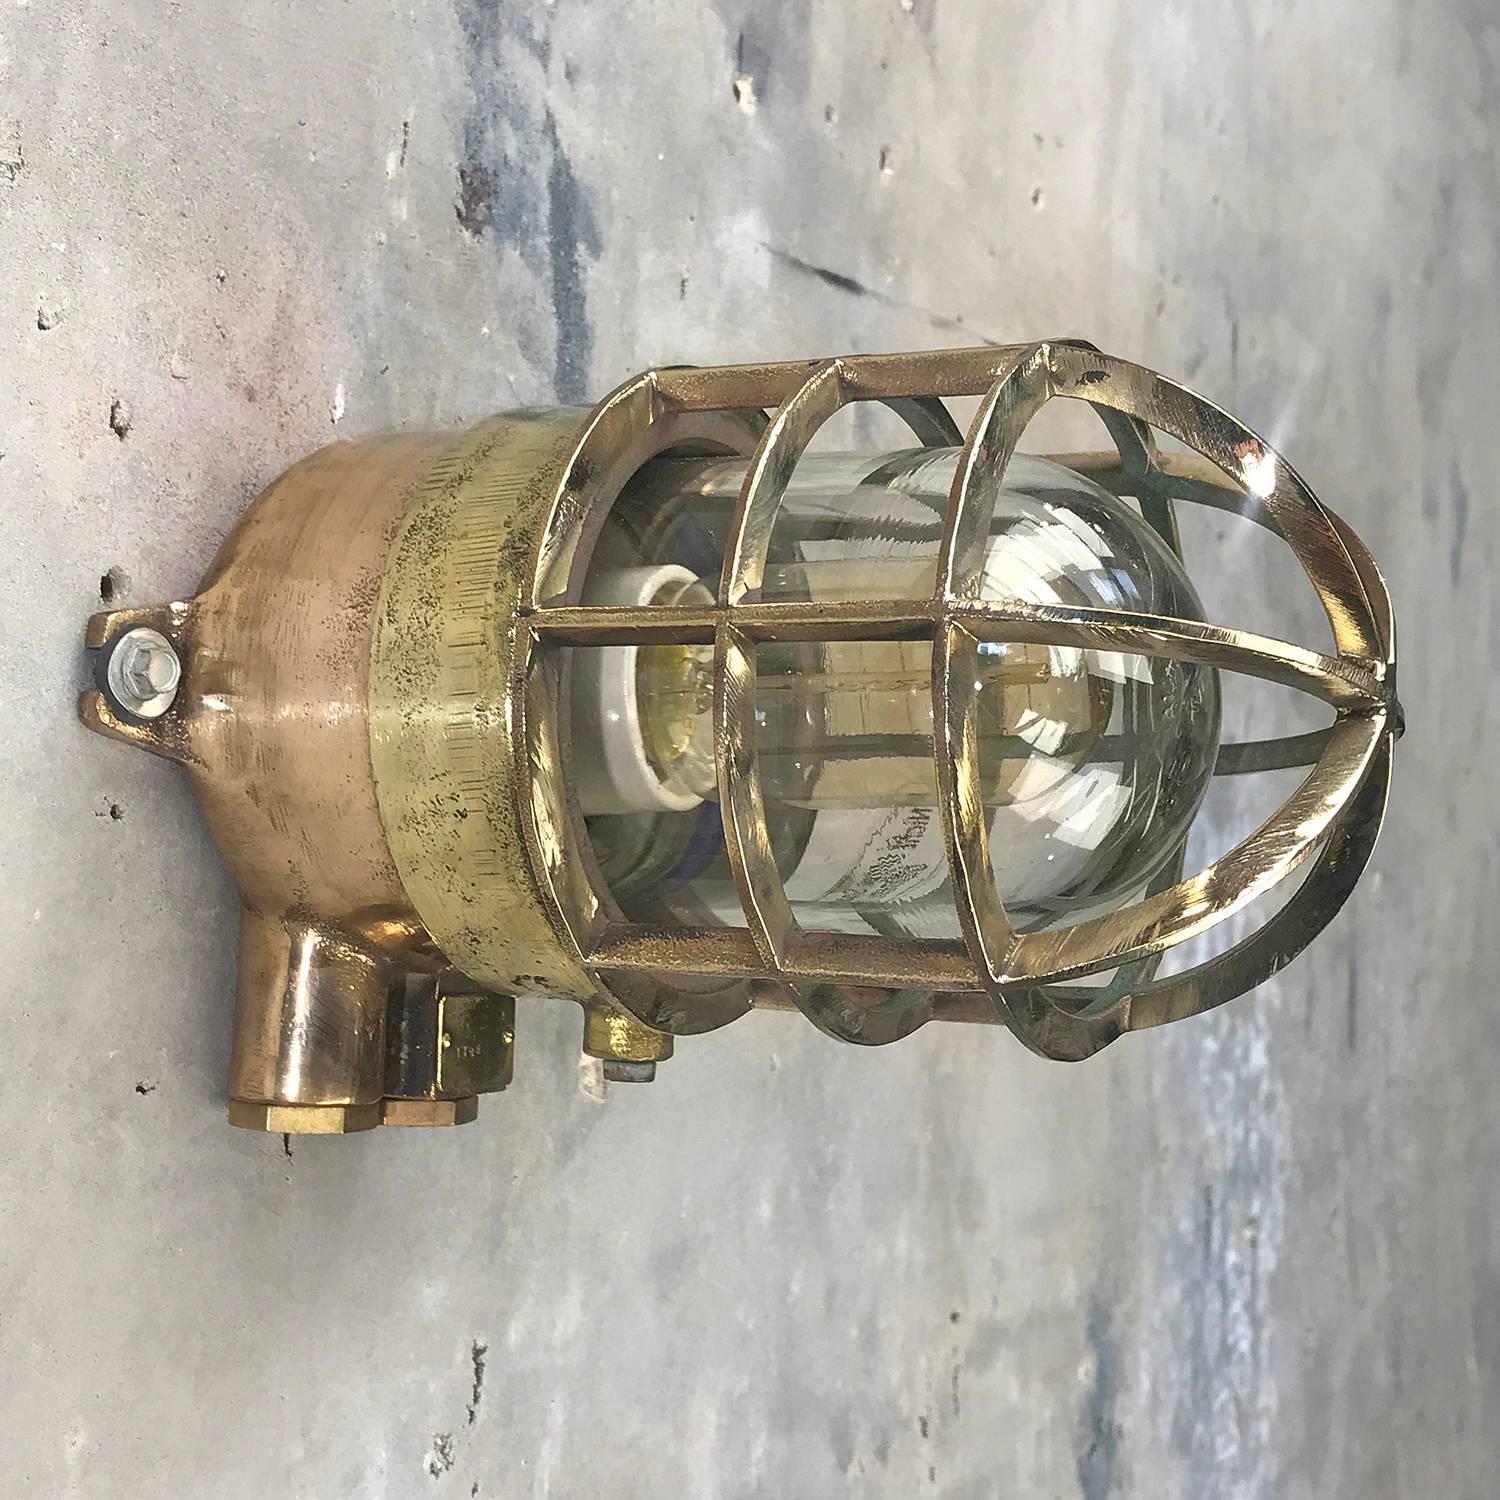 Solid cast bronze and brass explosion proof pendant manufactured, circa 1975. Ex. rated
 
It has the original ceramic and brass E27 lamp holder which looks brand new, and is completely free from chips / damage. 
 
Reclaimed from super tankers